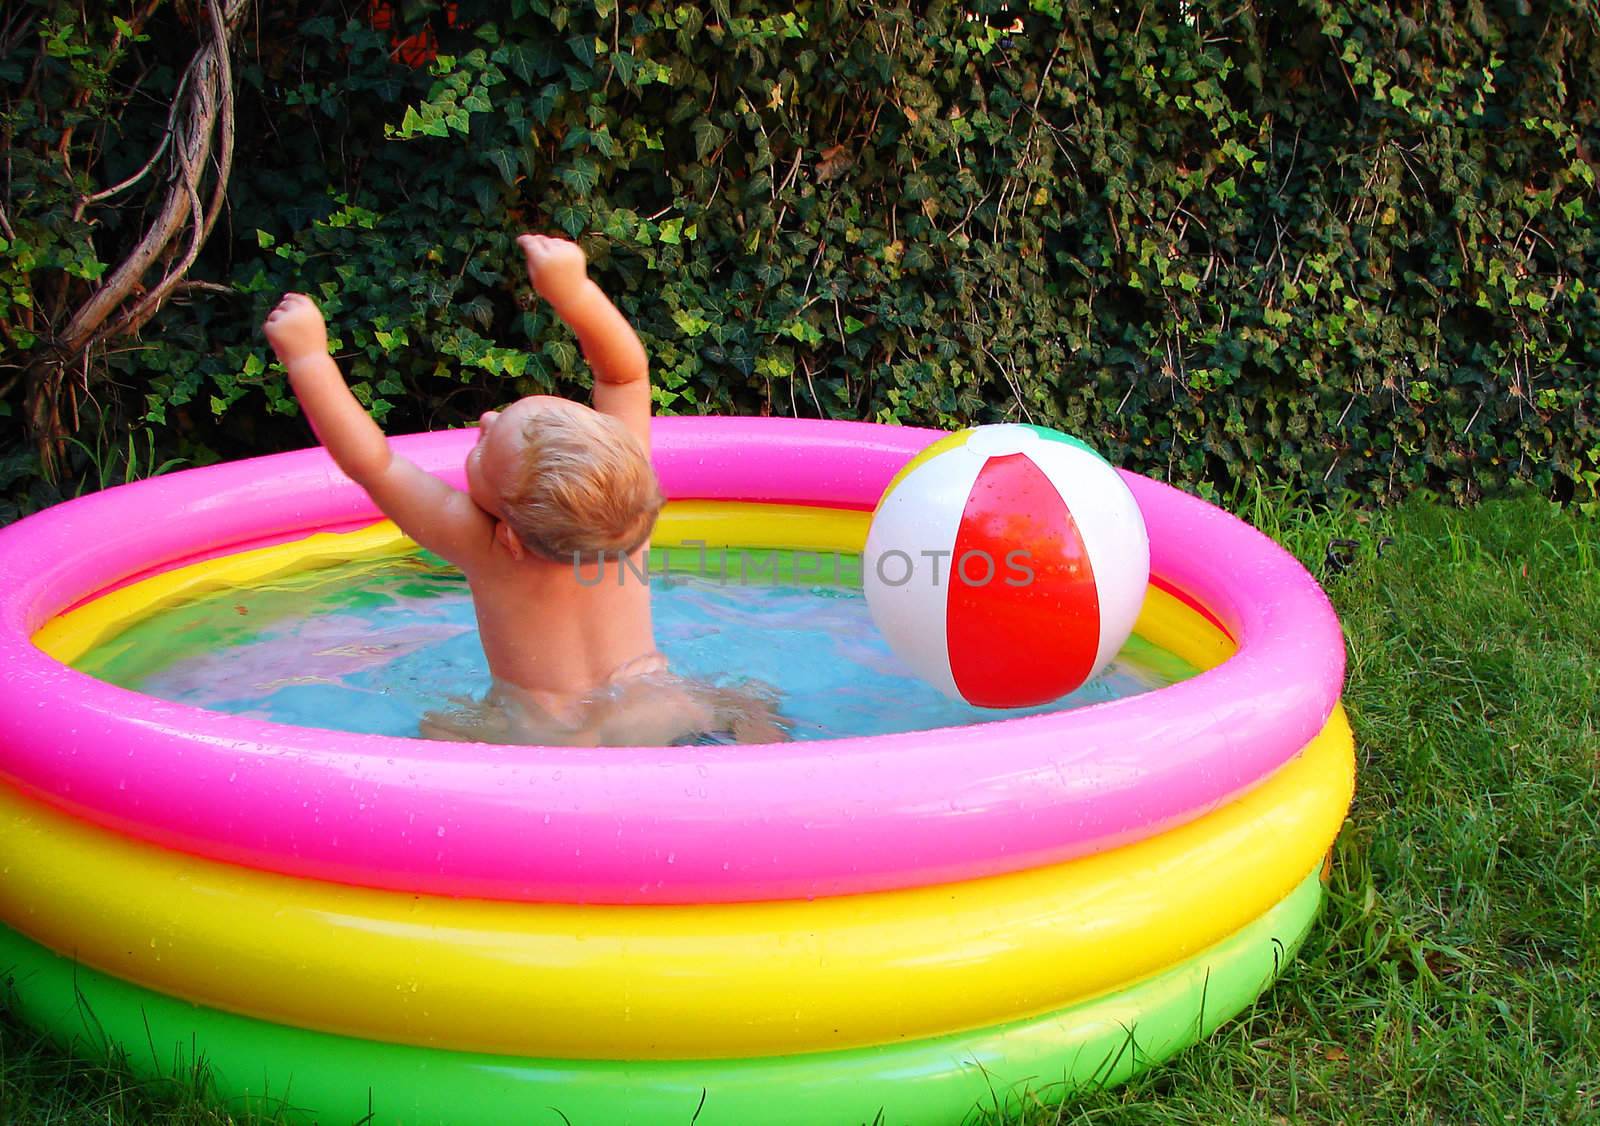 The kid in an inflatable pool